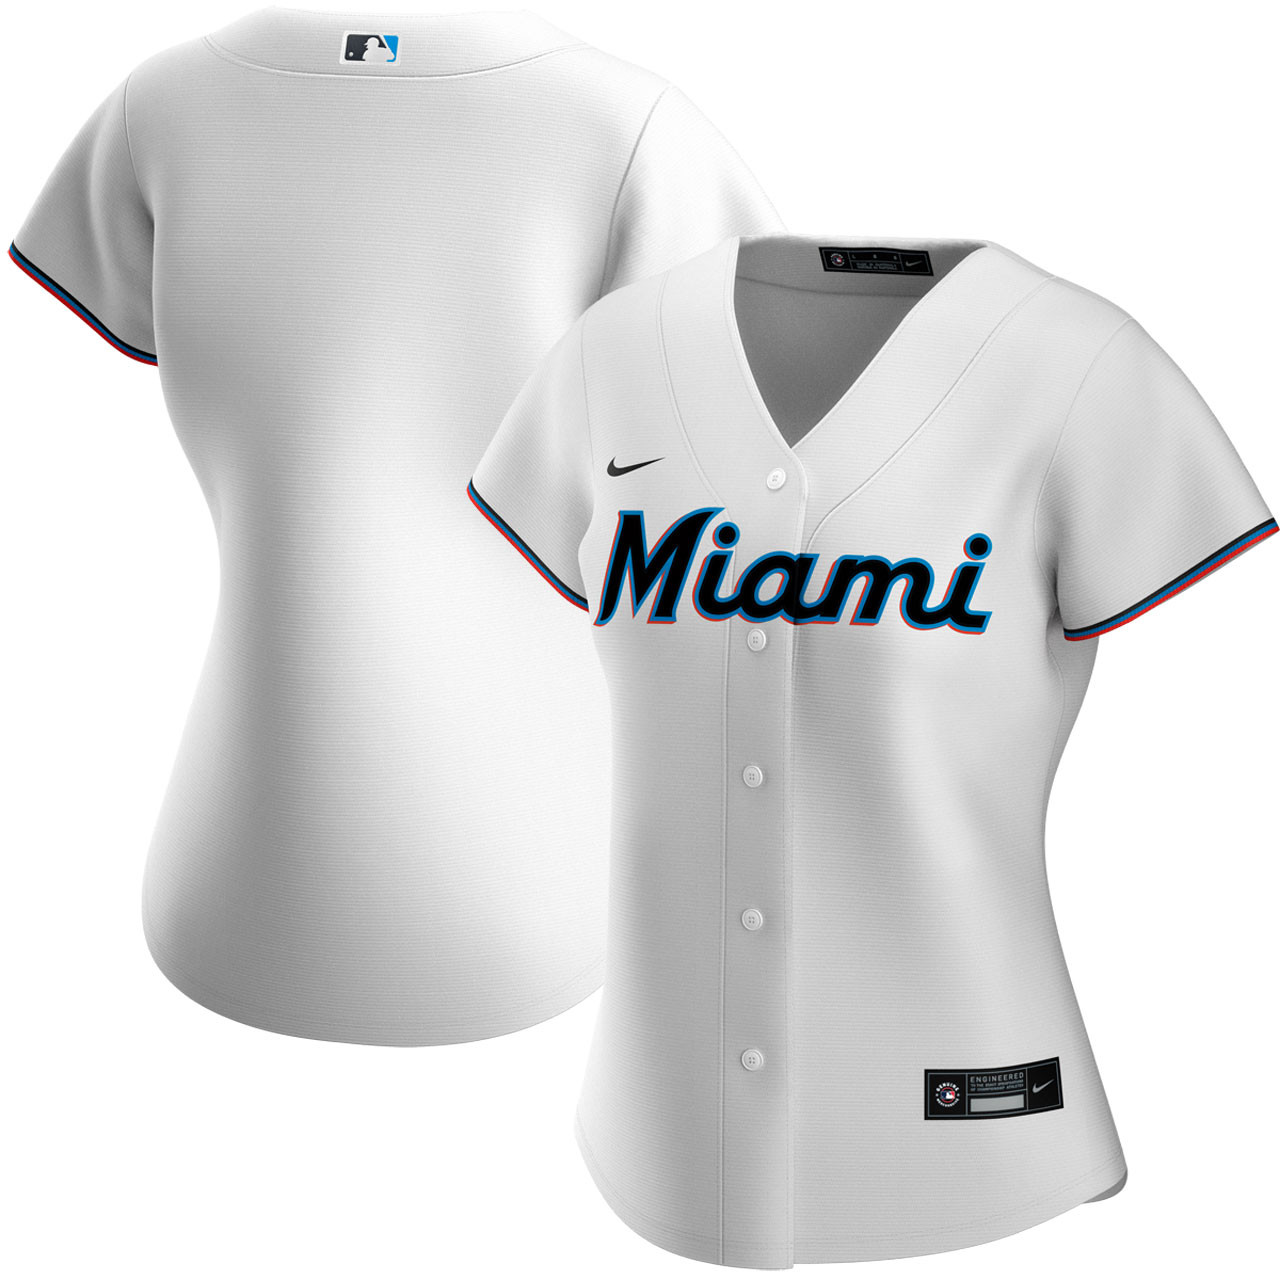 Miami Marlins White Home Women's Jersey by Nike